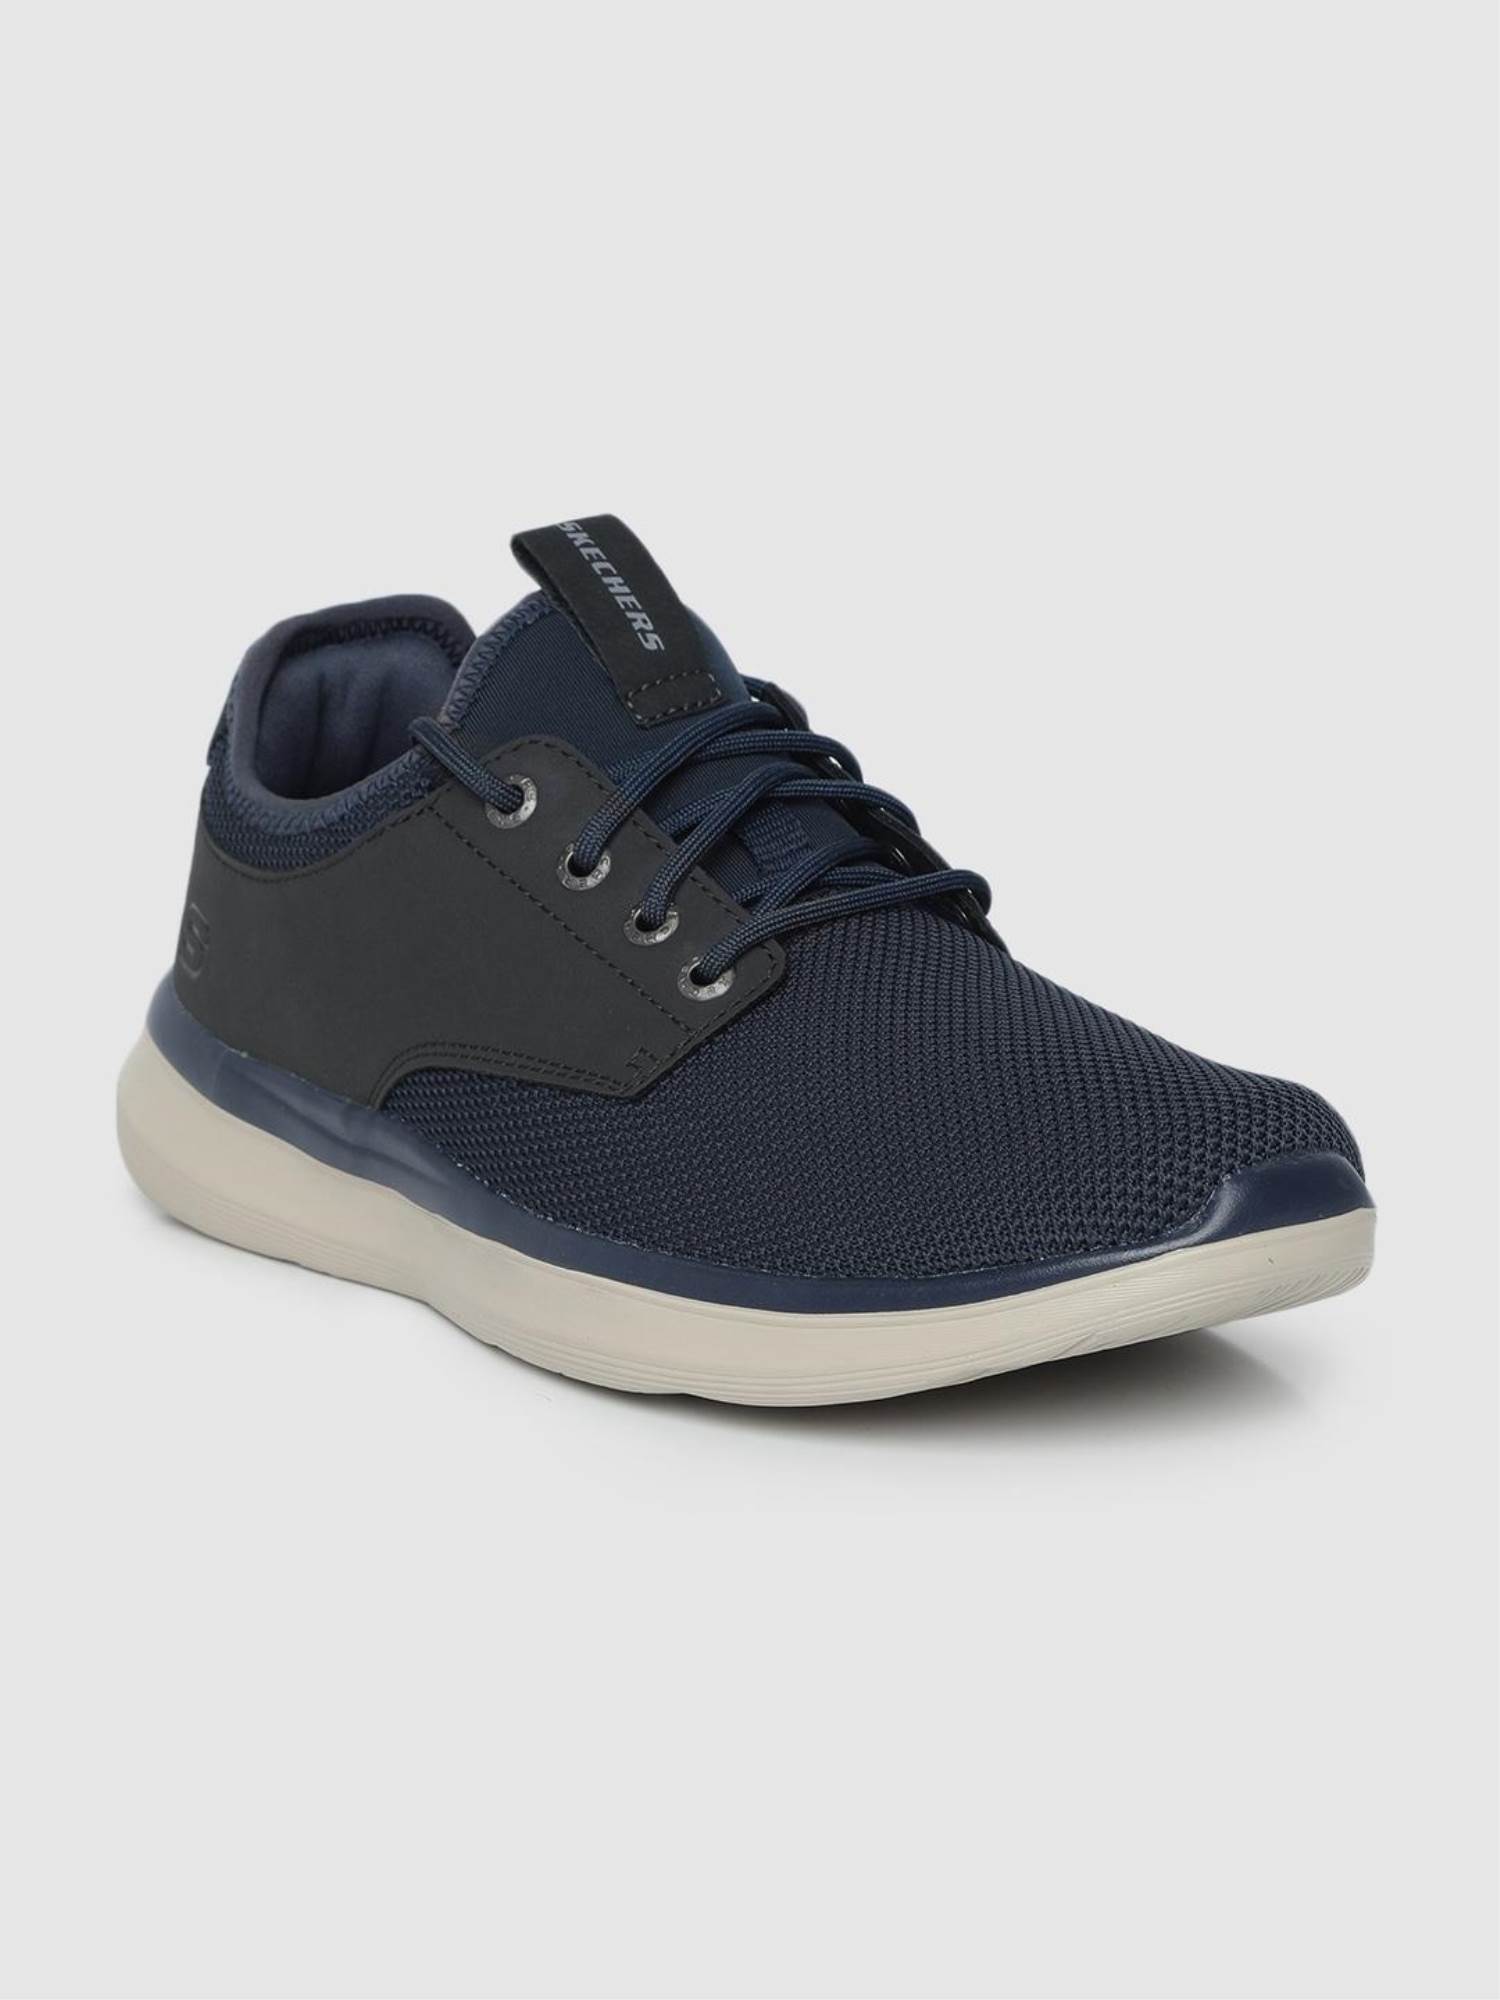 Skechers Brand Men`s Delson 2.0 Weslo Air Colled Memory Foam Sports Shoes  66272 (Navy) :: RAJASHOES